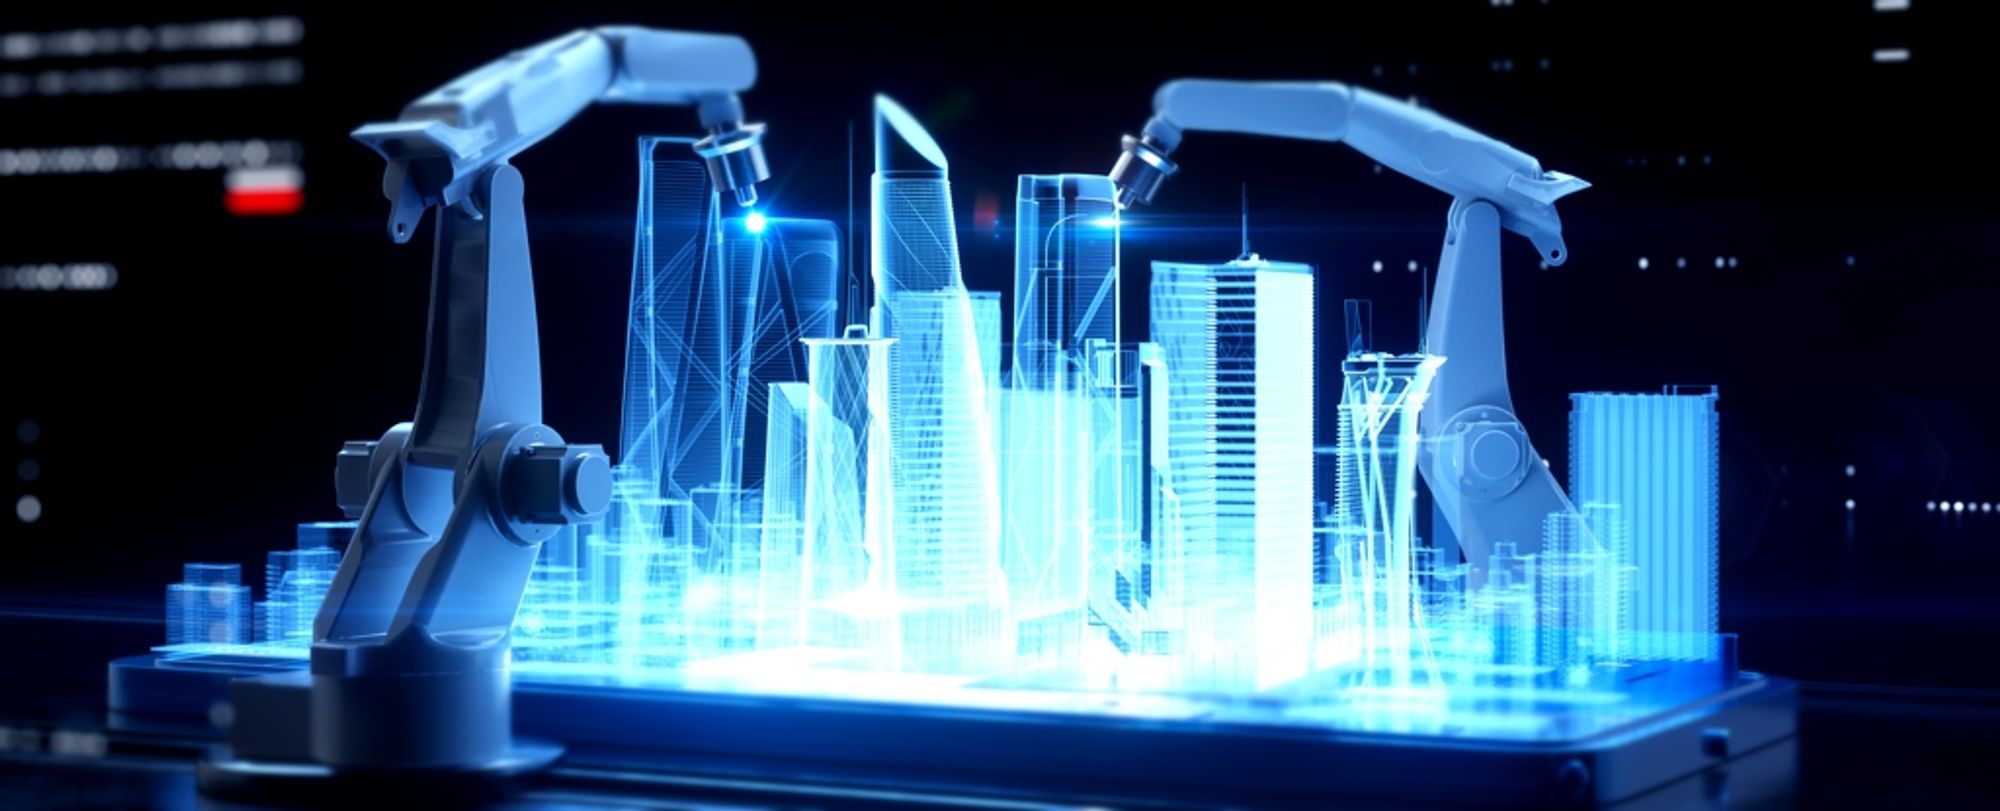 AI Can Already Design Better Cities Than Humans, Study Shows : ScienceAlert